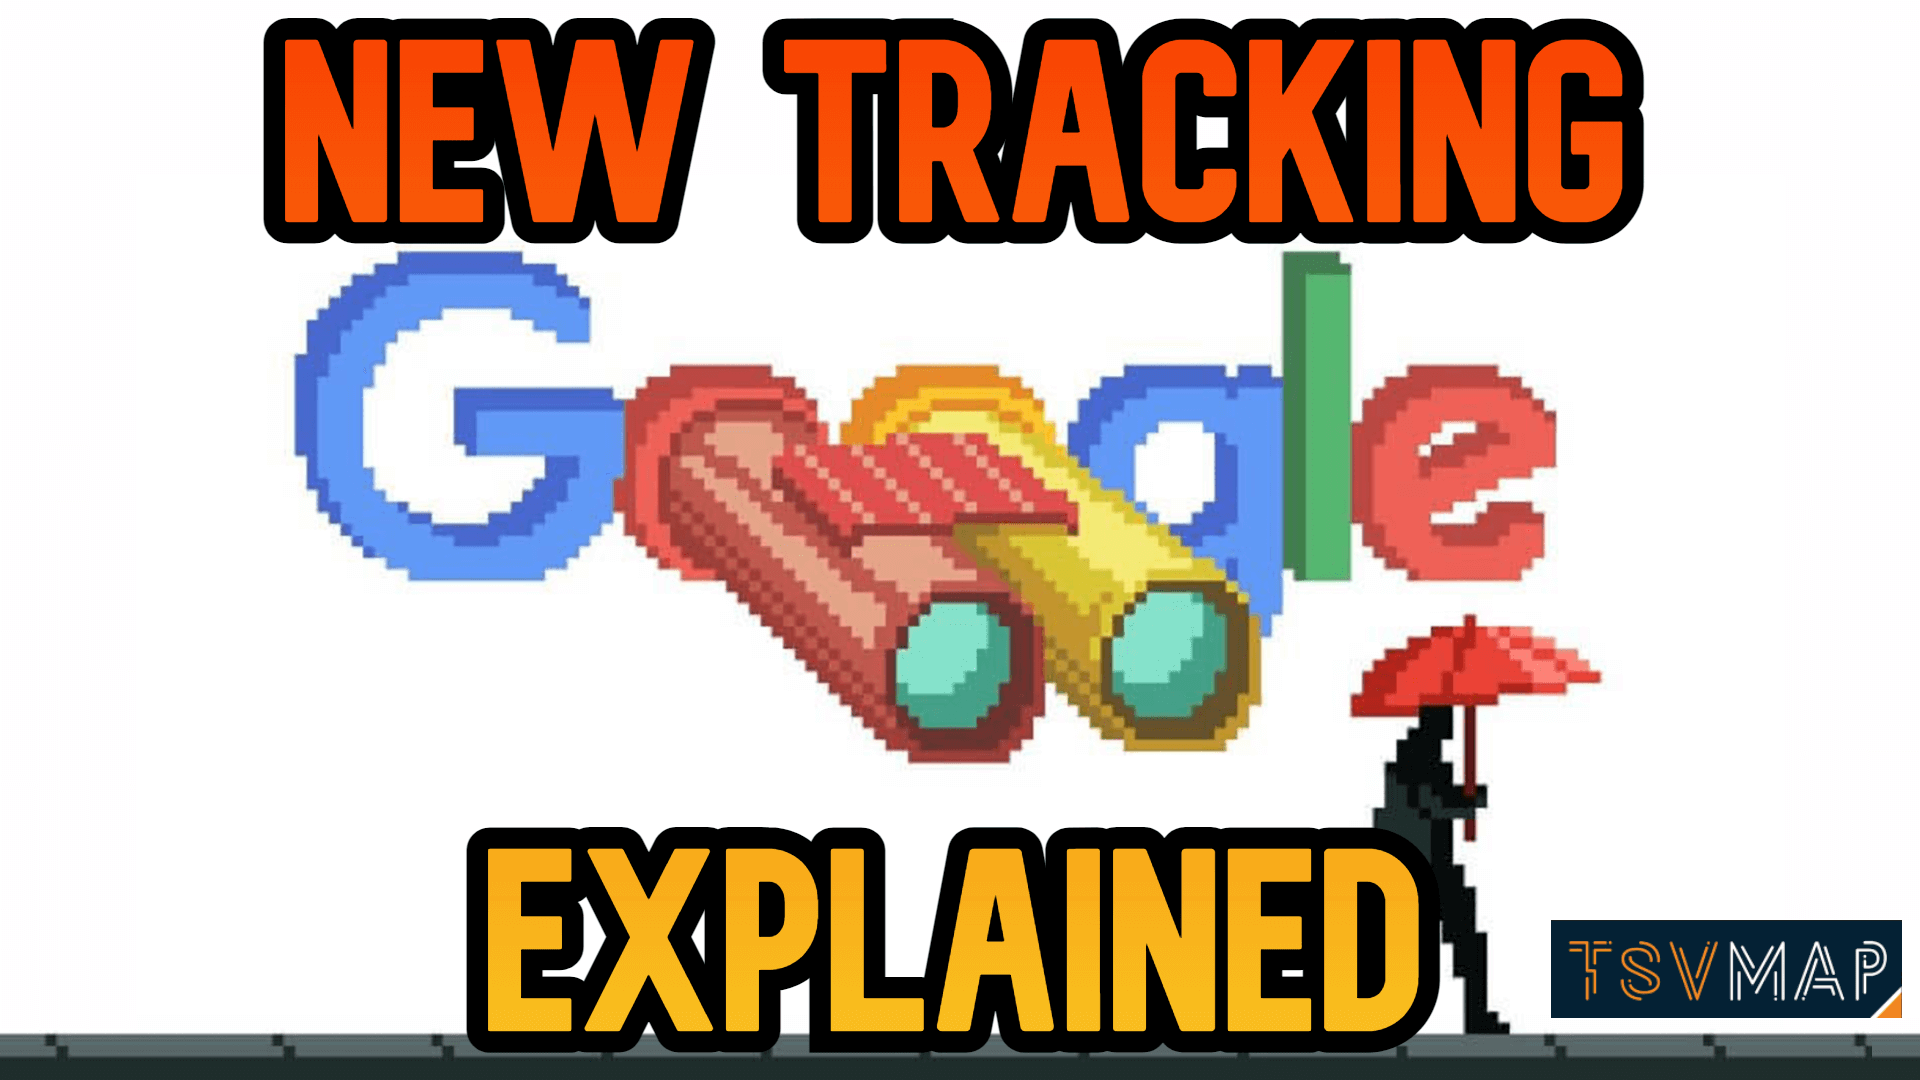 FLoK - New Tracking Google Explained, Cyber Security, MRP, Analytics, IT Security, ERP Systems, TSVmap, Greenville, SC, USA